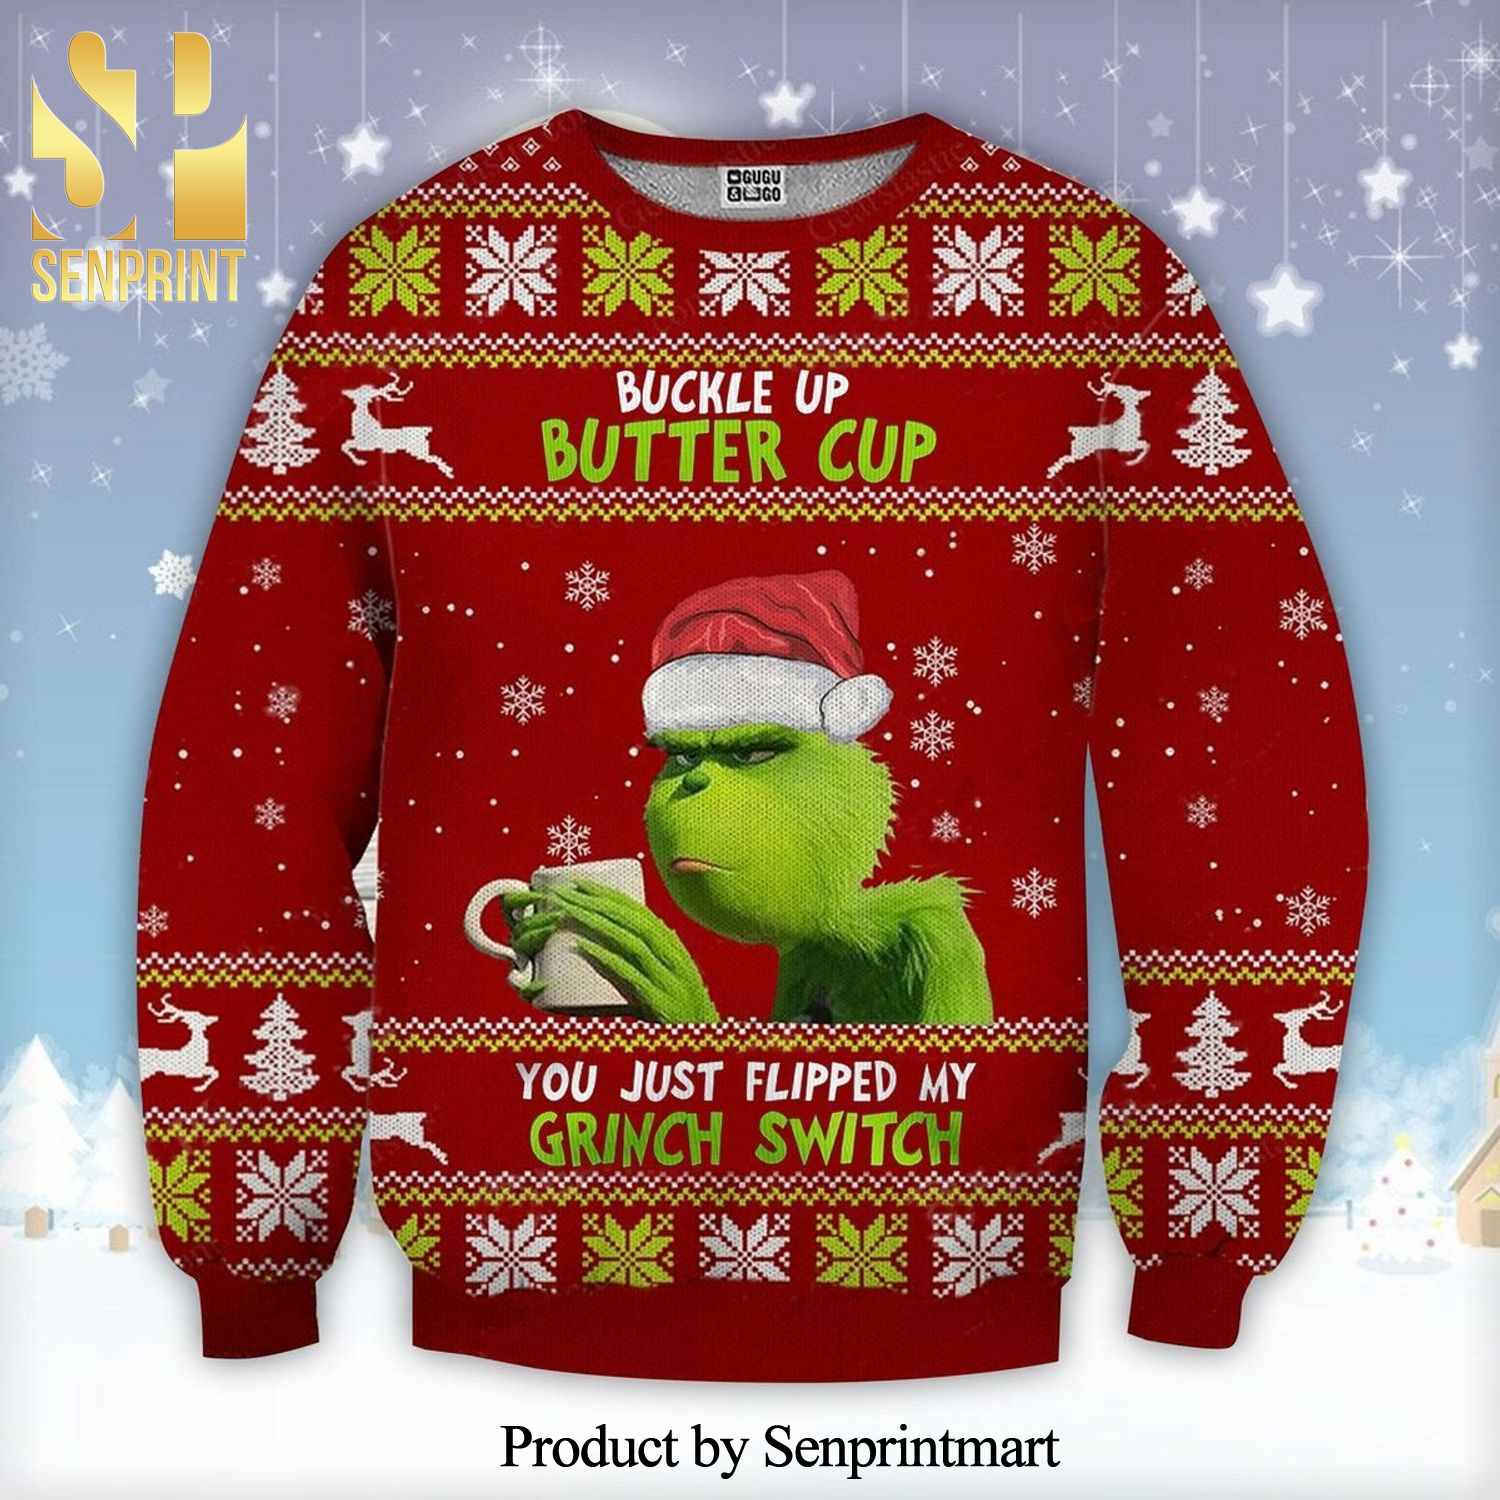 The Grinch Buckle Up Butter Cup You Just Flipped My Grinch Switch Knitted Ugly Christmas Sweater